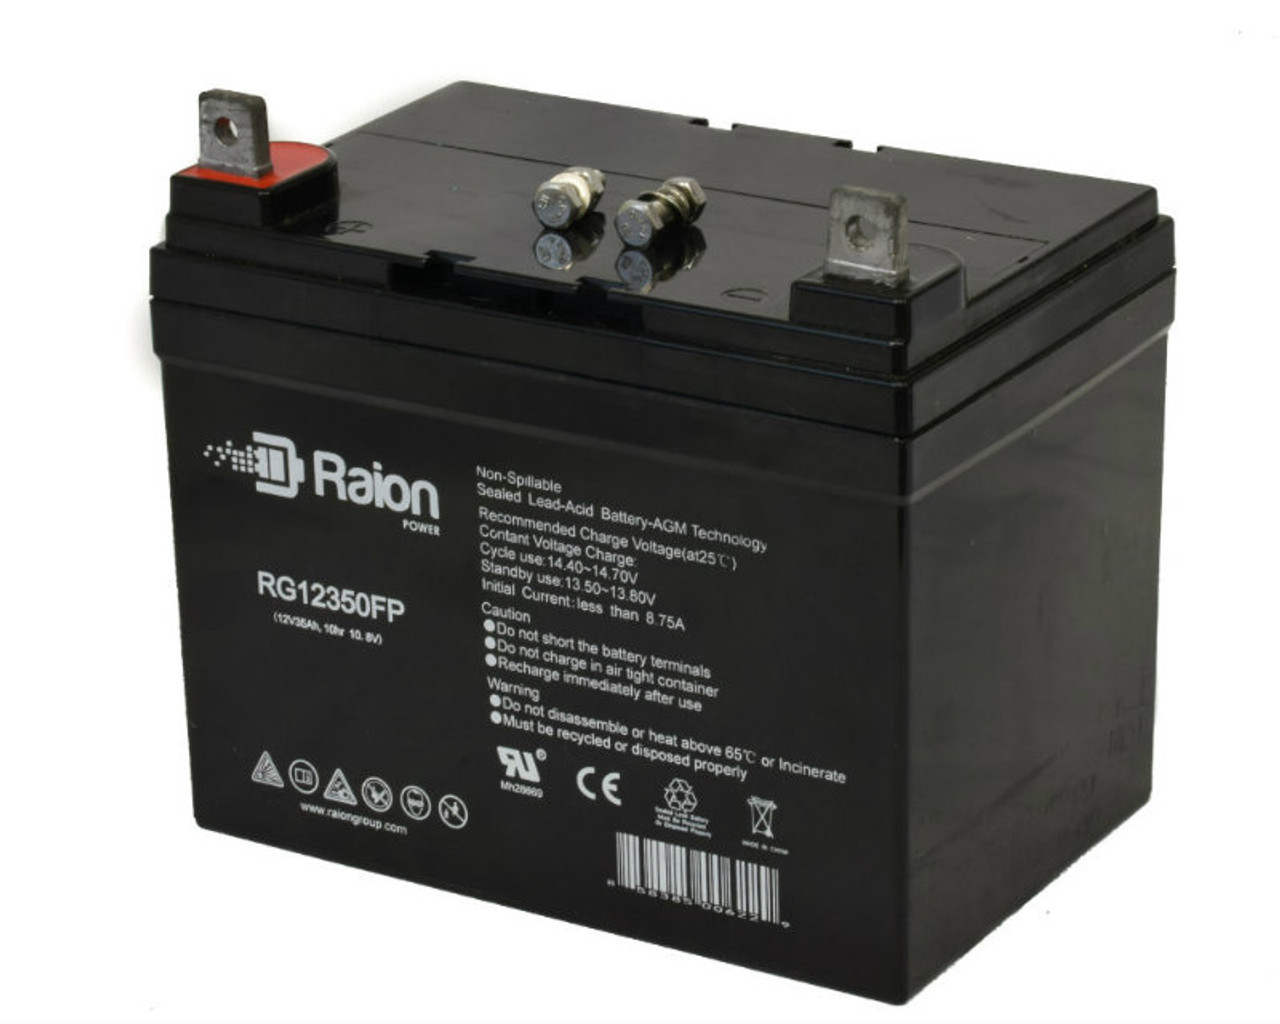 Raion Power Replacement 12V 35Ah RG12350FP Battery for Troy-Bilt 3000 Series